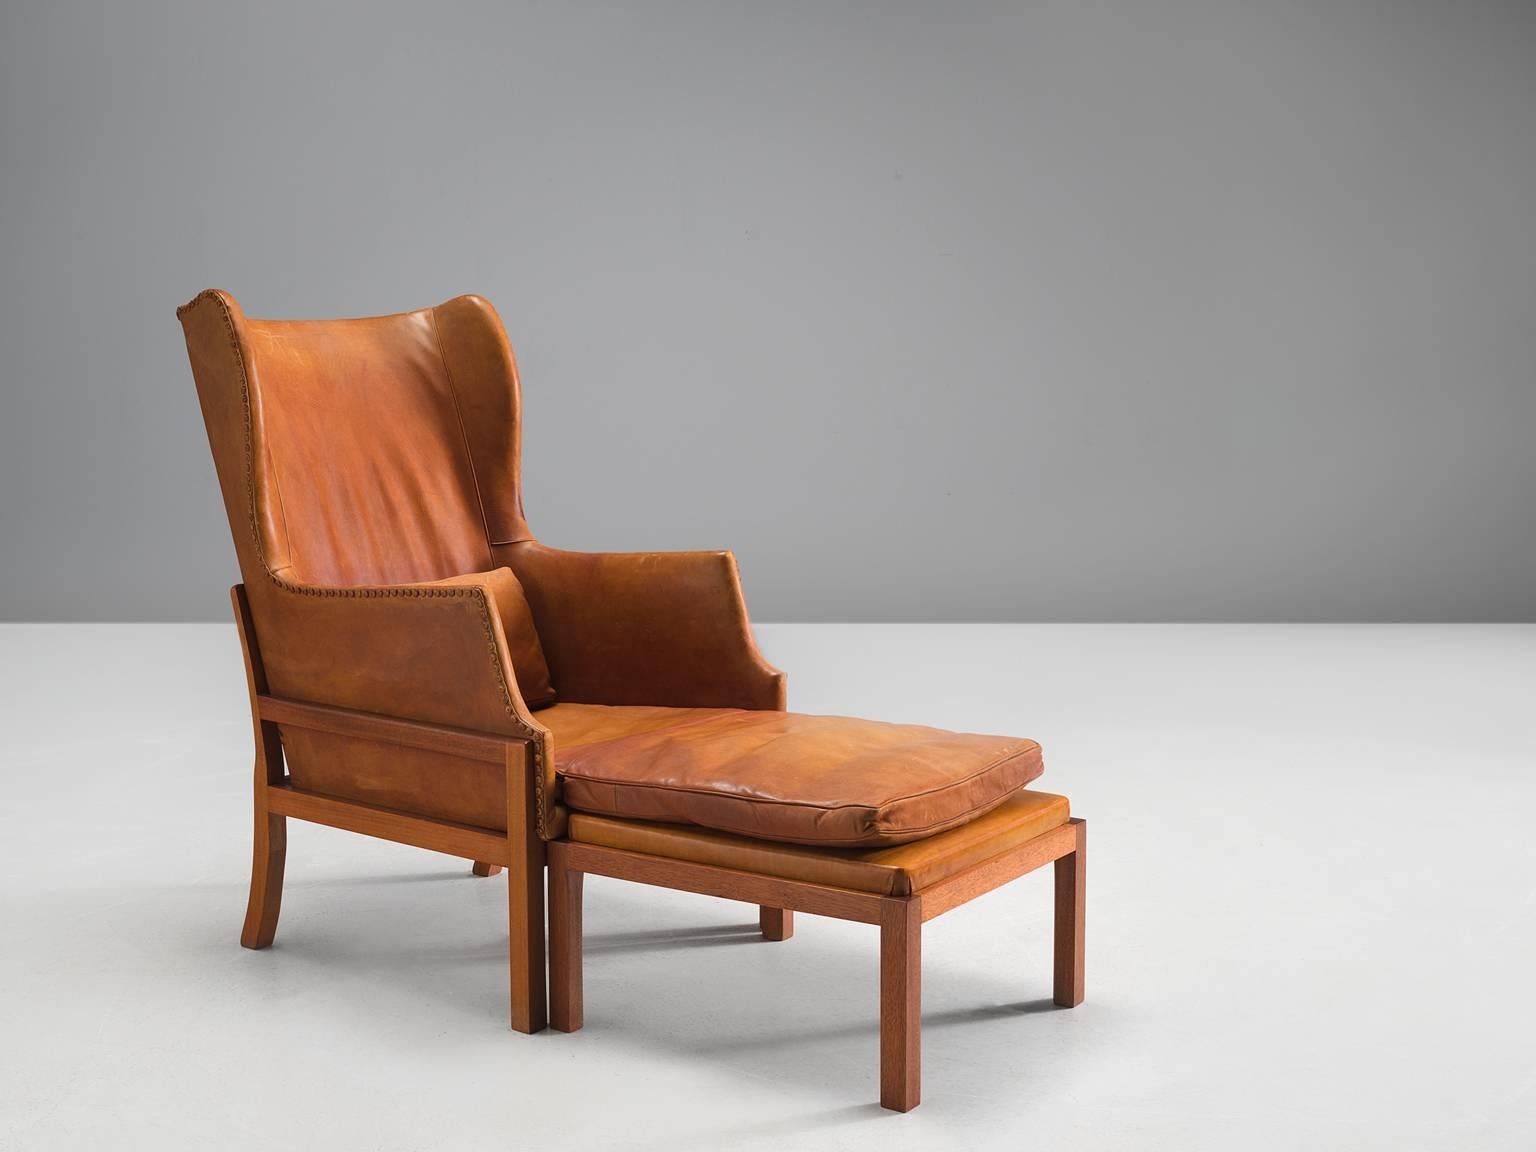 Mogens Koch for Ivan Schlechter, wingback chair and ottoman, cognac leather, mahogany, Denmark, design 1936, manufactured 1970.

Elegant and comfortable armchair in mahogany and leather by Mogens Koch. This lounge chair was designed with high